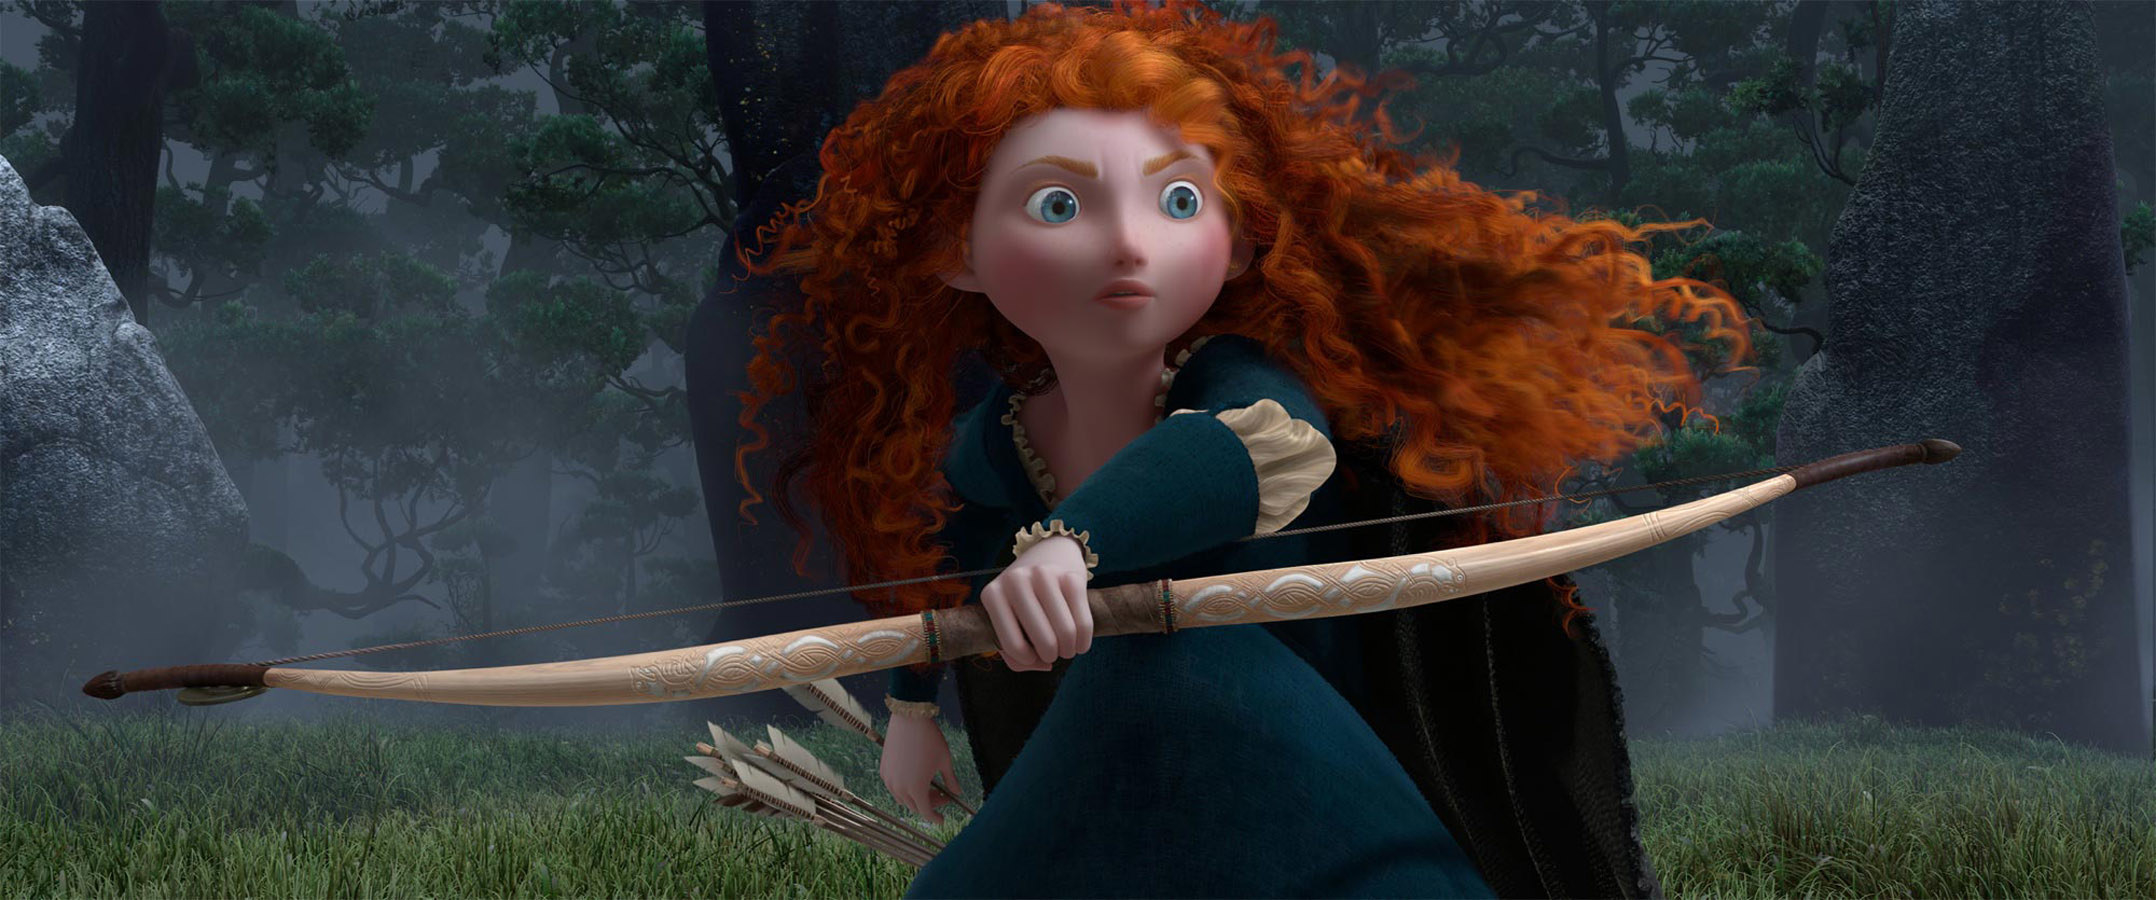 Merida in the forest holding her bow at the ready and reaching for an arrow